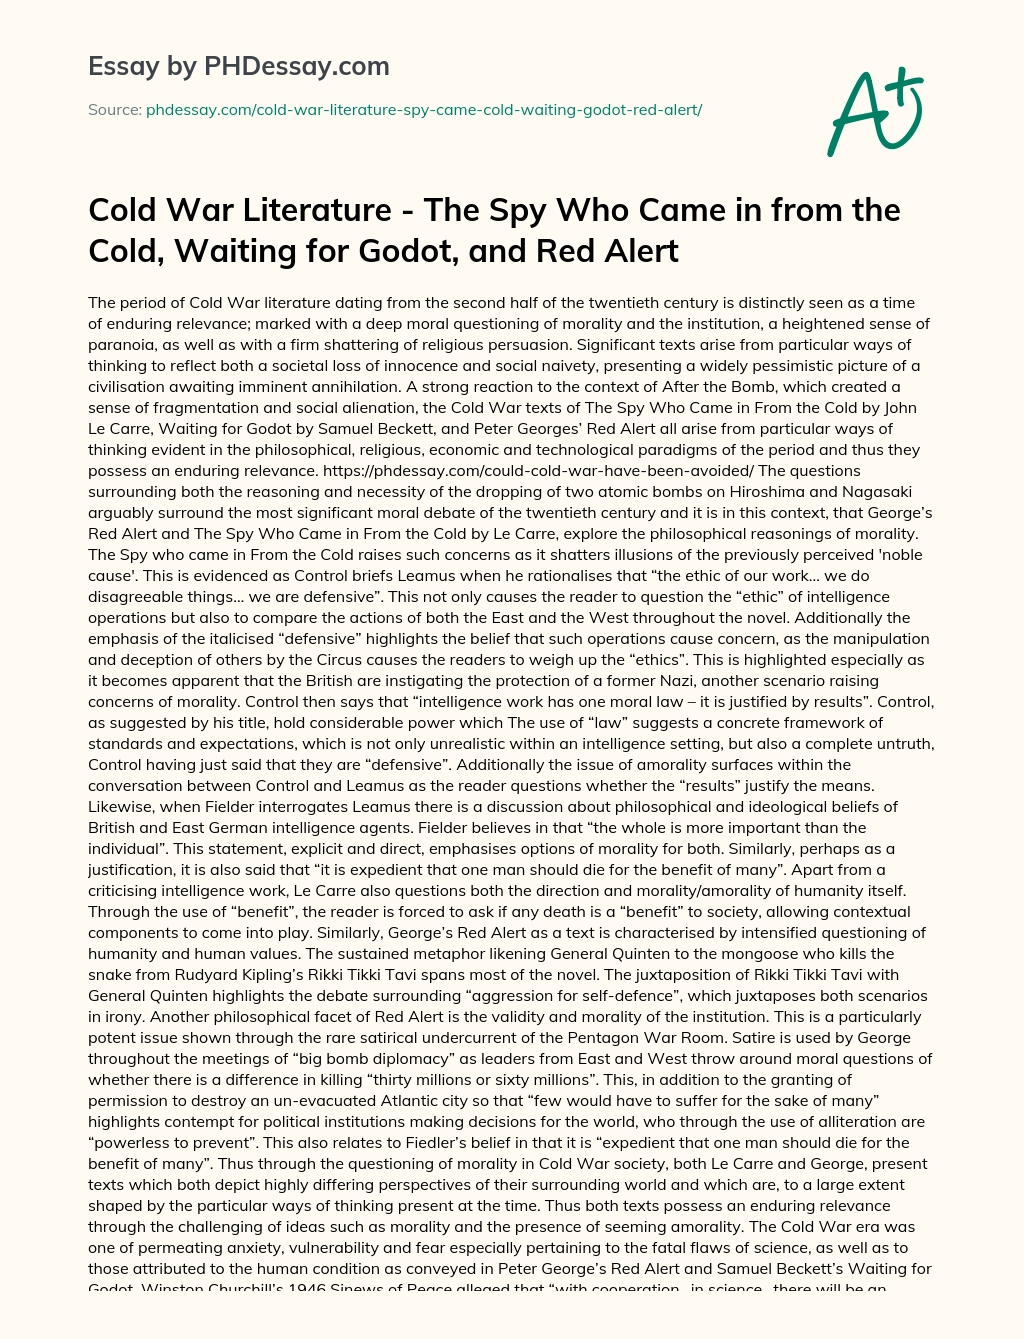 Cold War Literature – The Spy Who Came in from the Cold, Waiting for Godot, and Red Alert essay